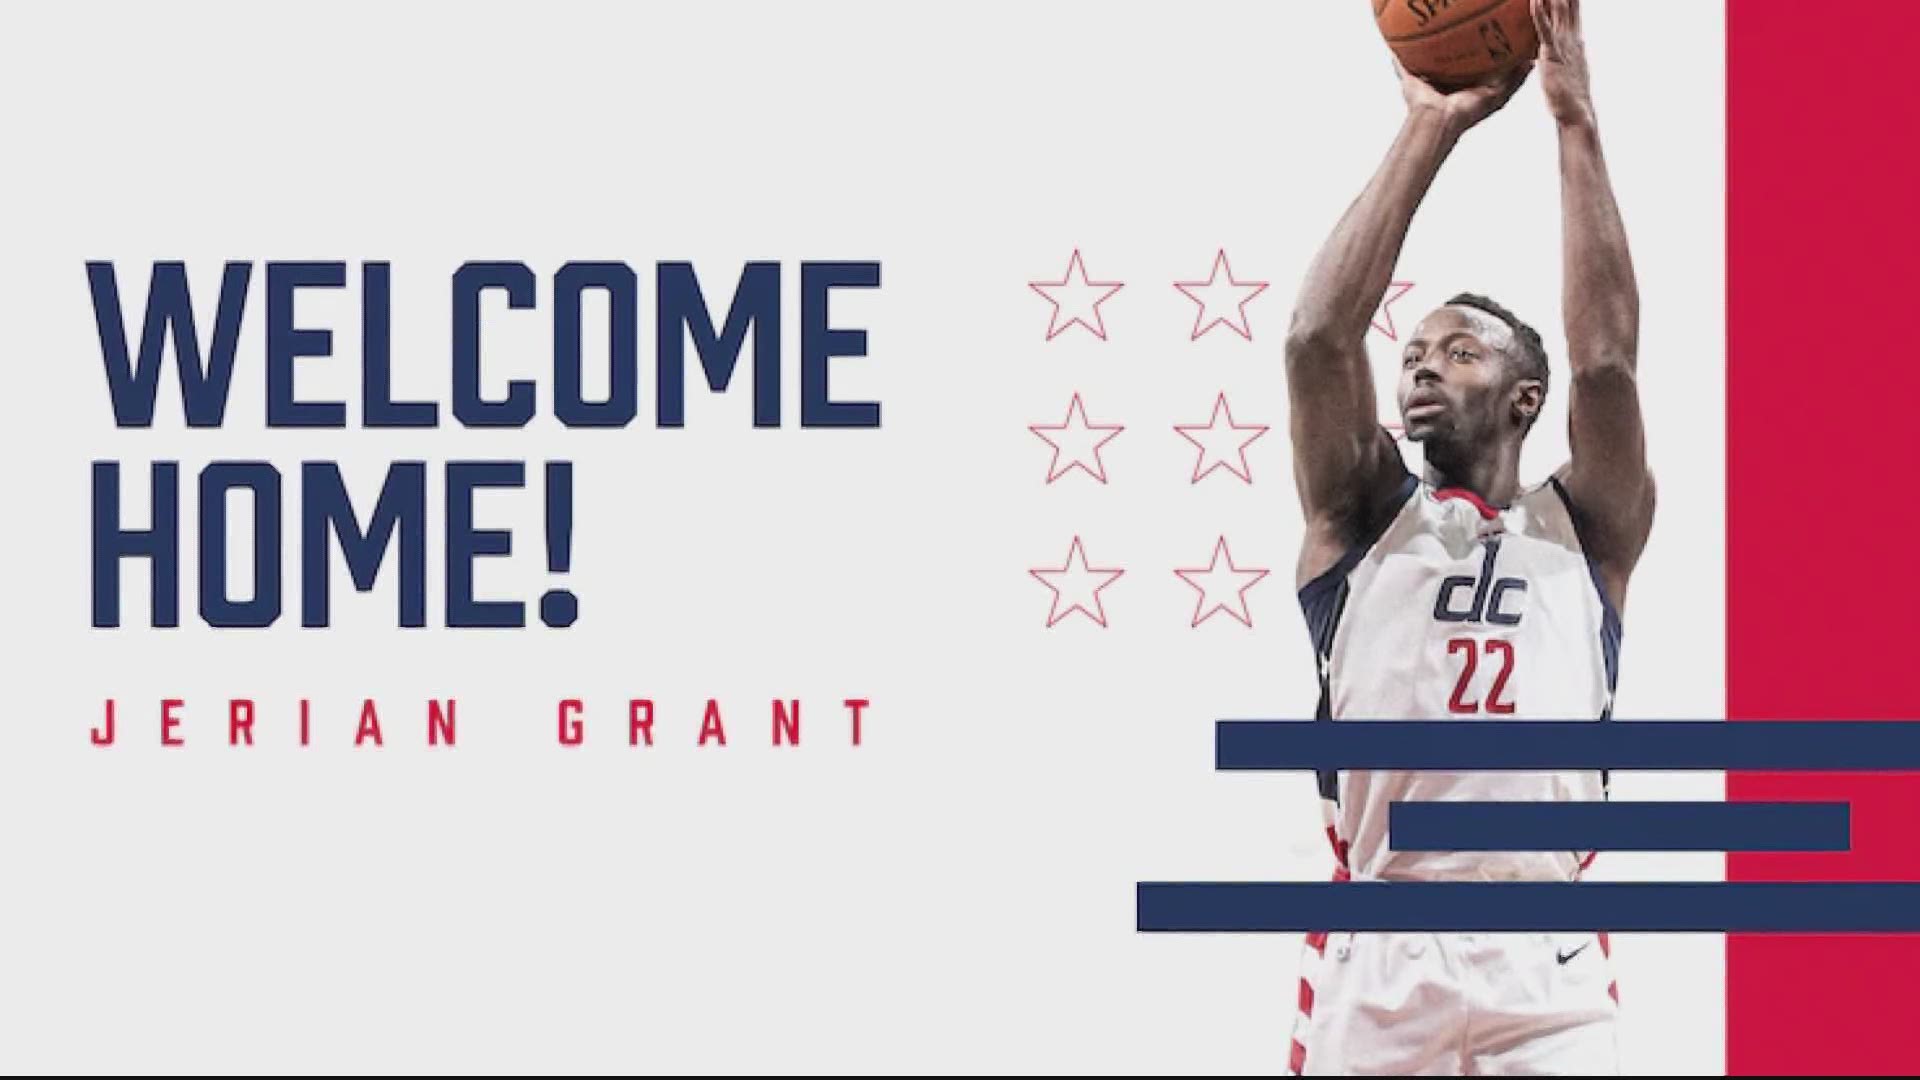 Jerian Grant making "dreams come true" by signing with Wizards